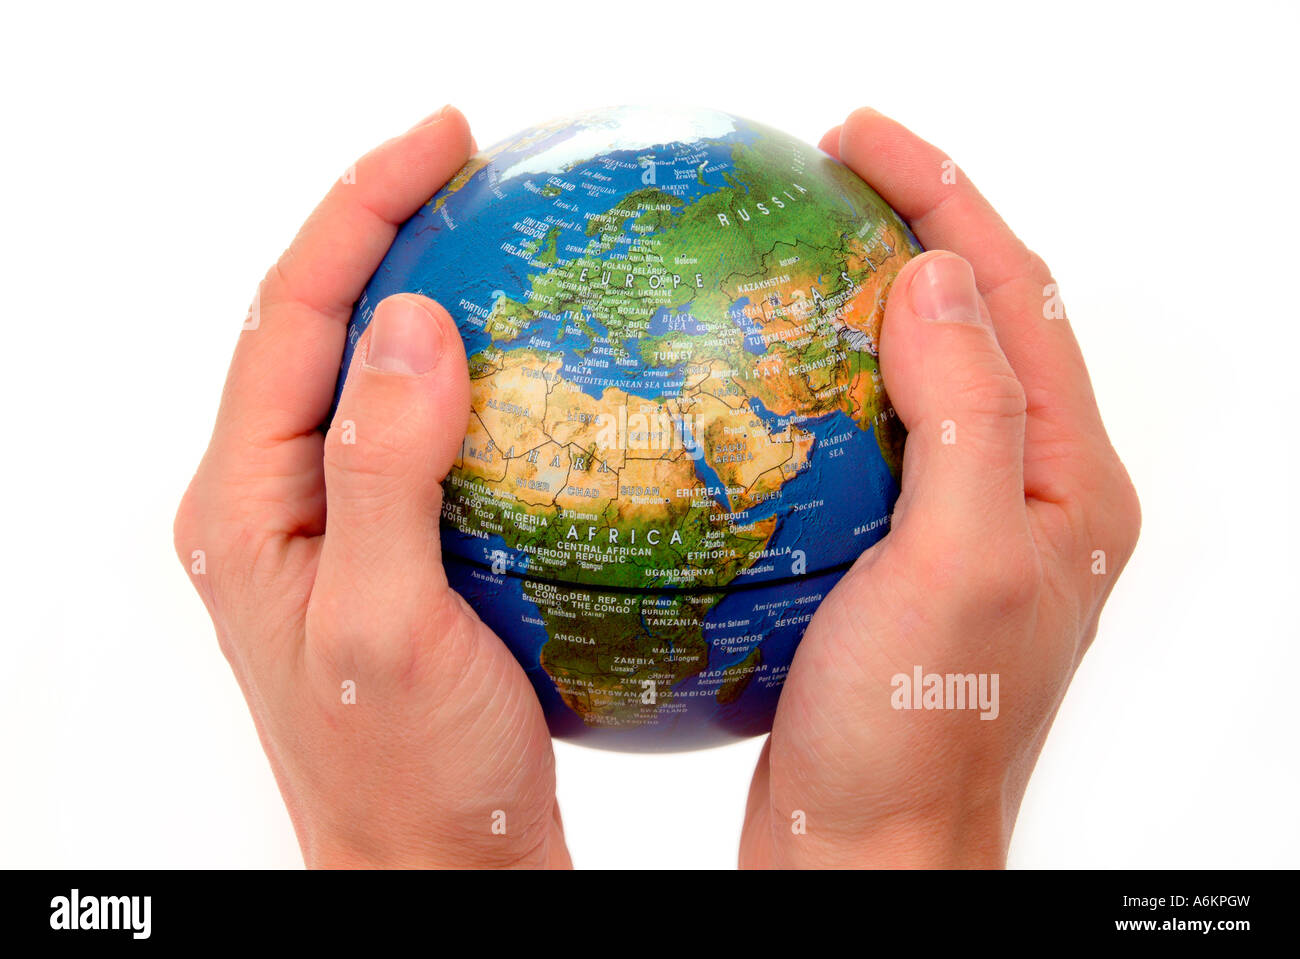 Hands holding a globe Banque D'Images